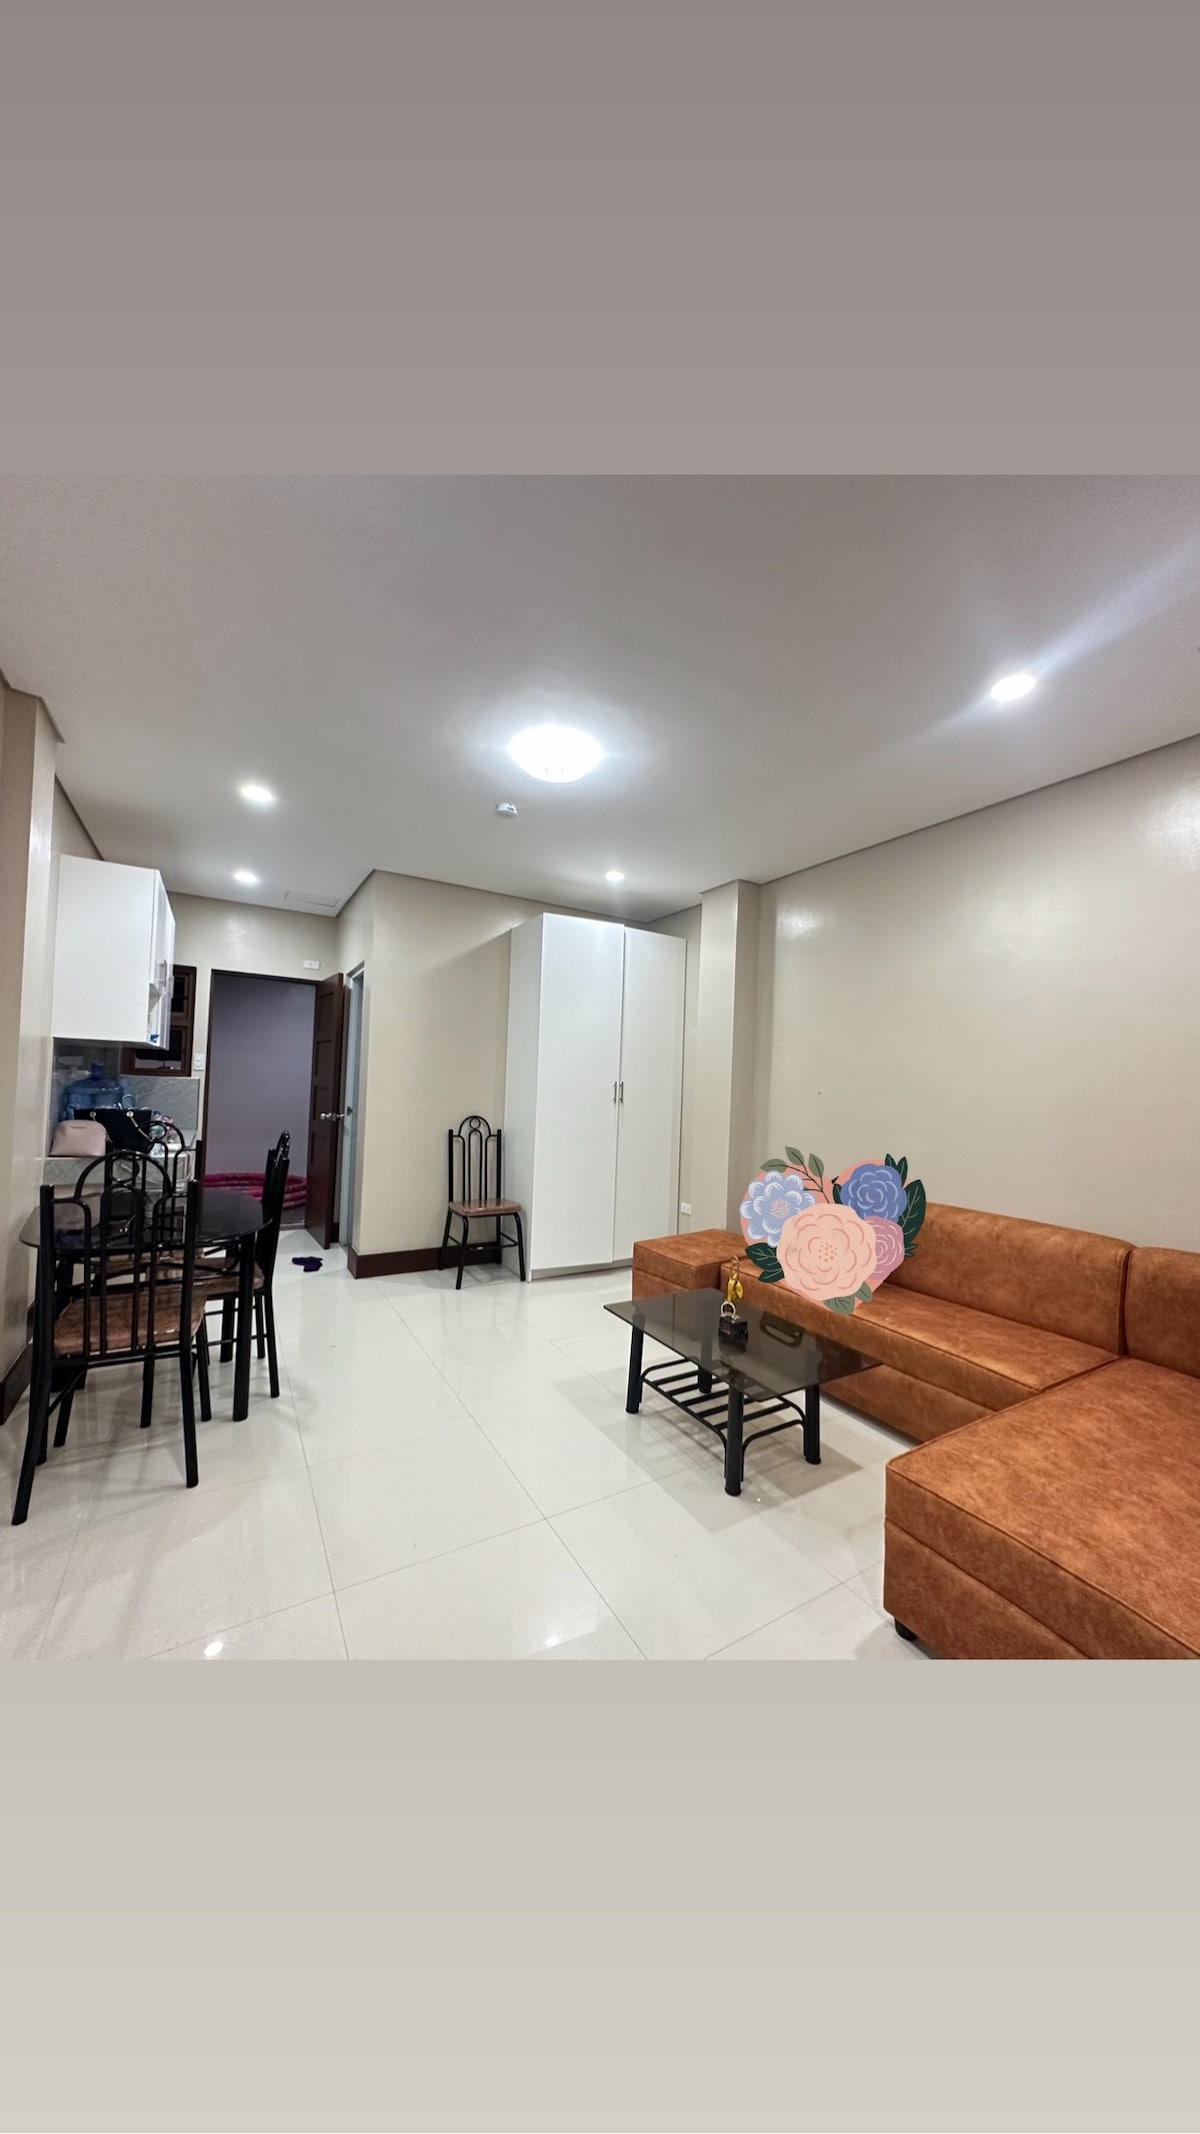 Ely's AirBnb Apartment